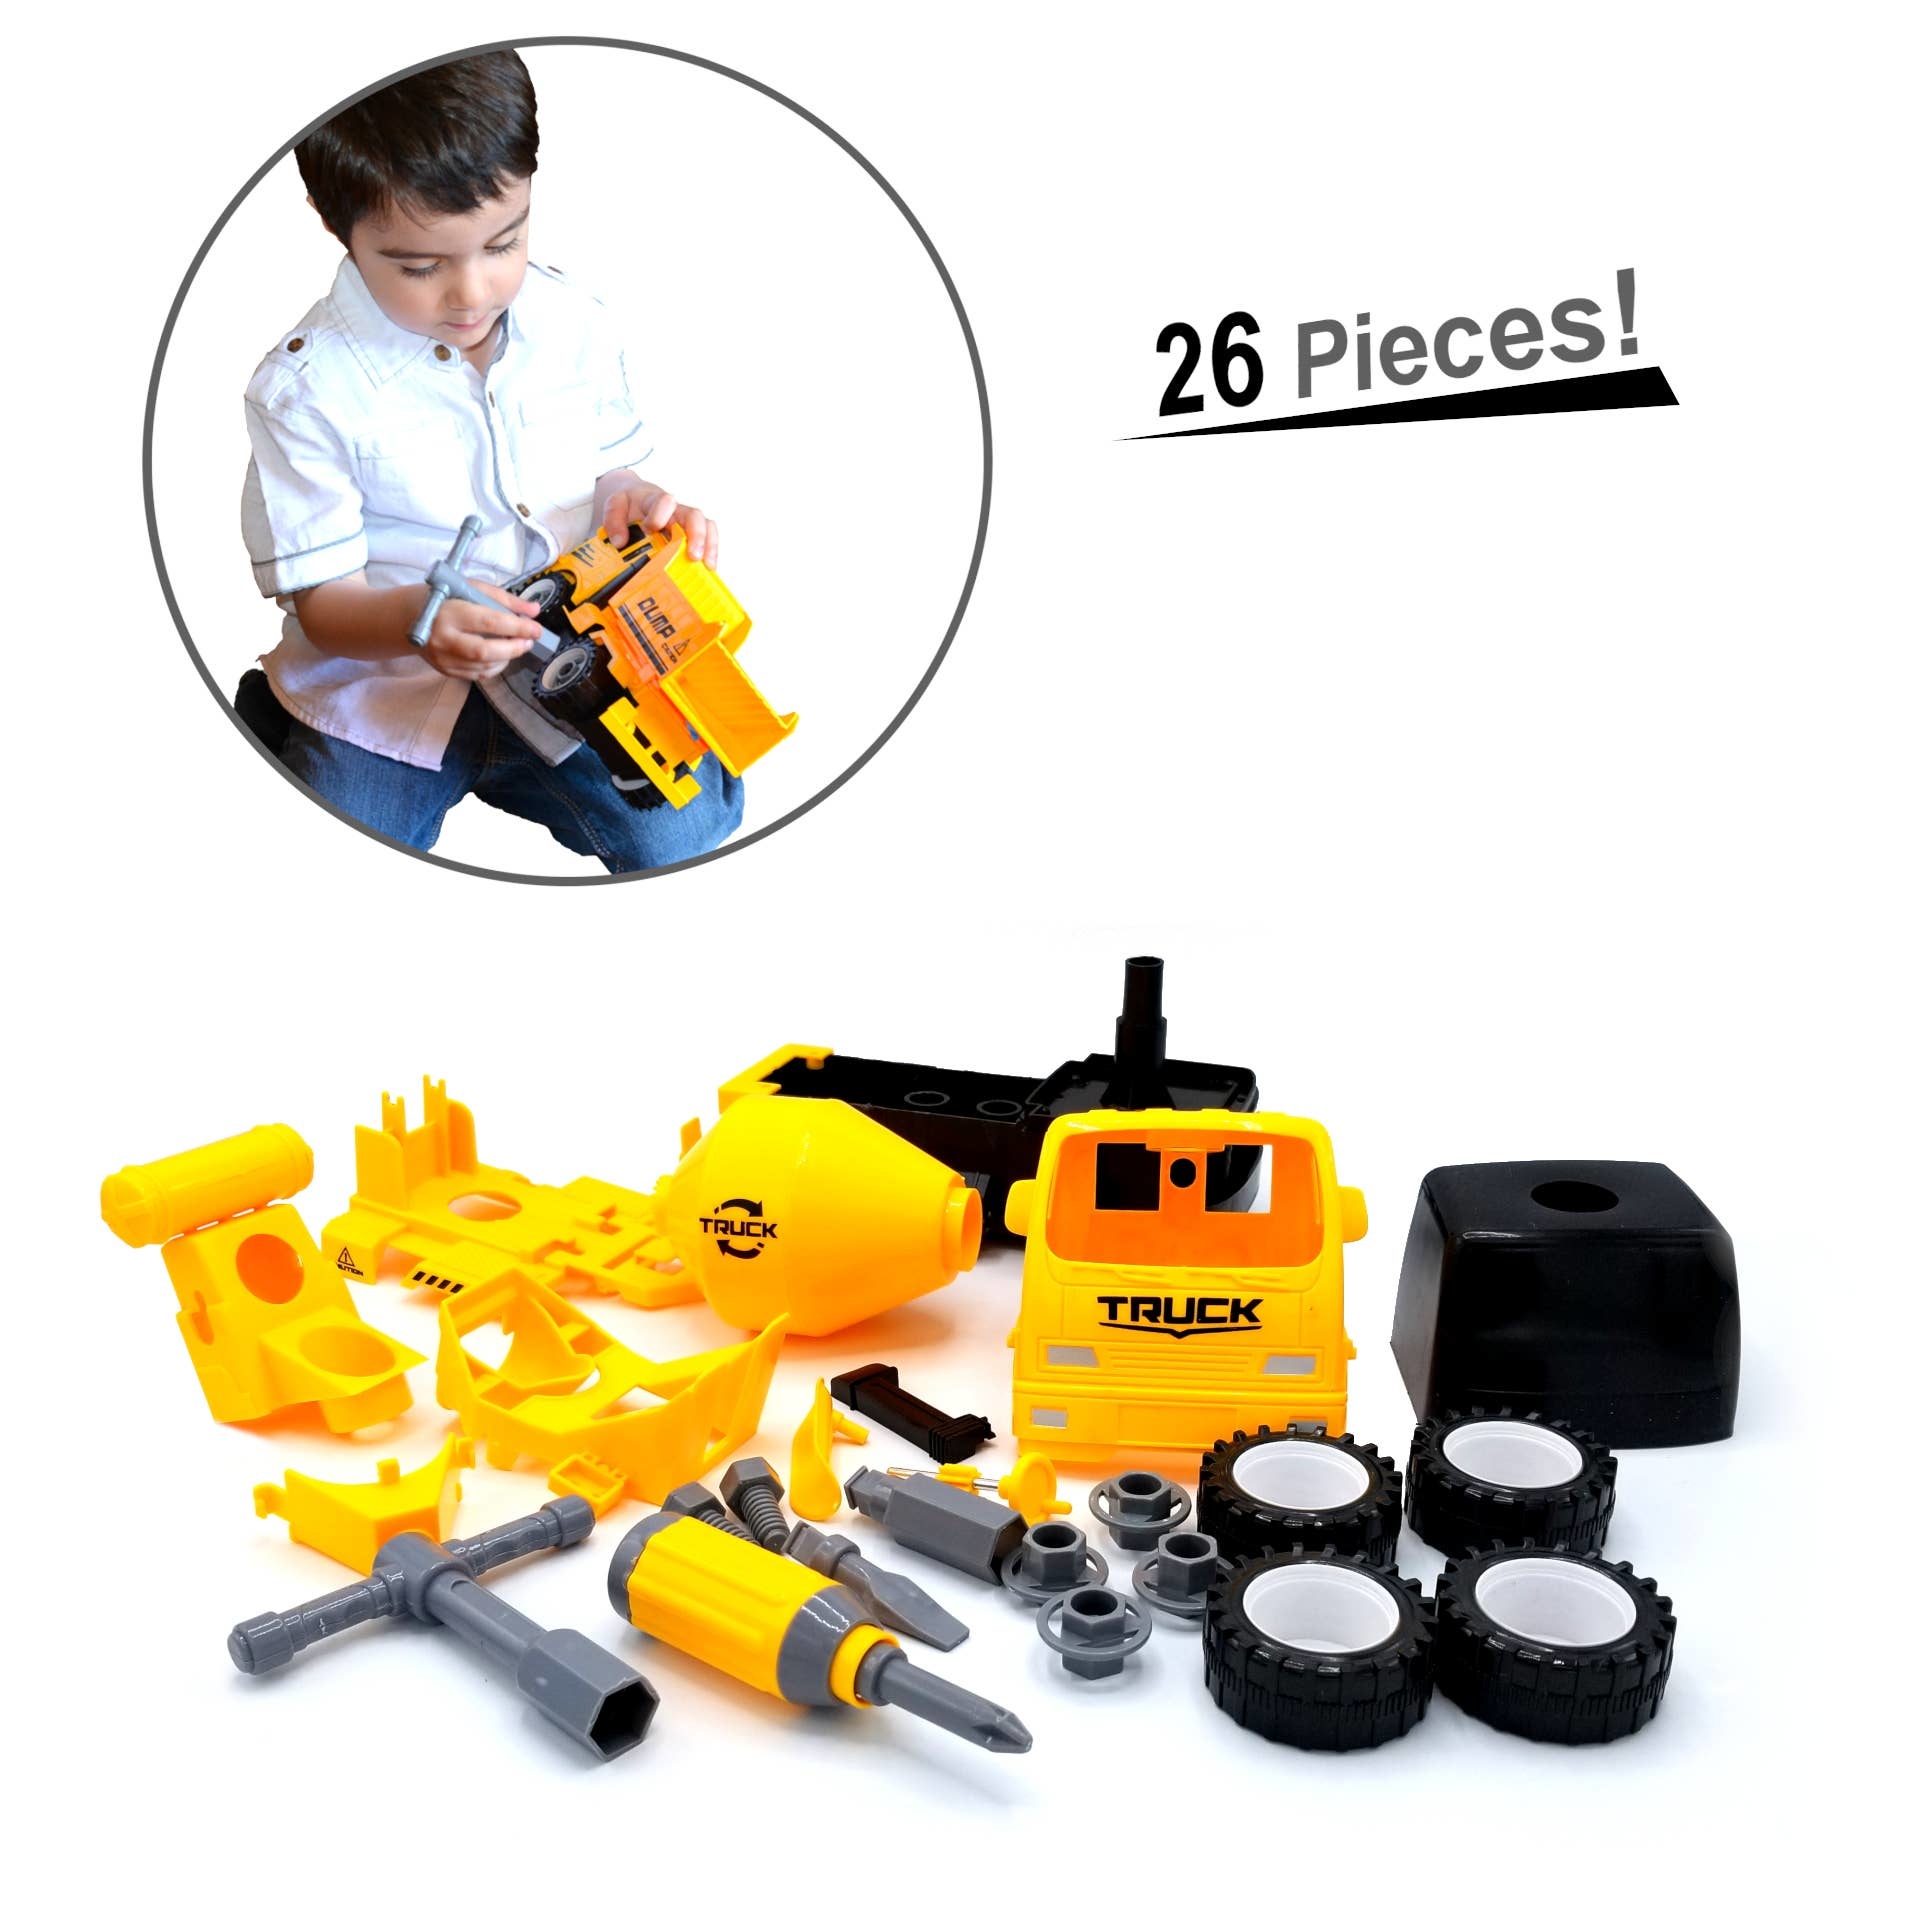 Mixer- Take-Apart-Put-Together/2-Toys-In-1 Truck Toy